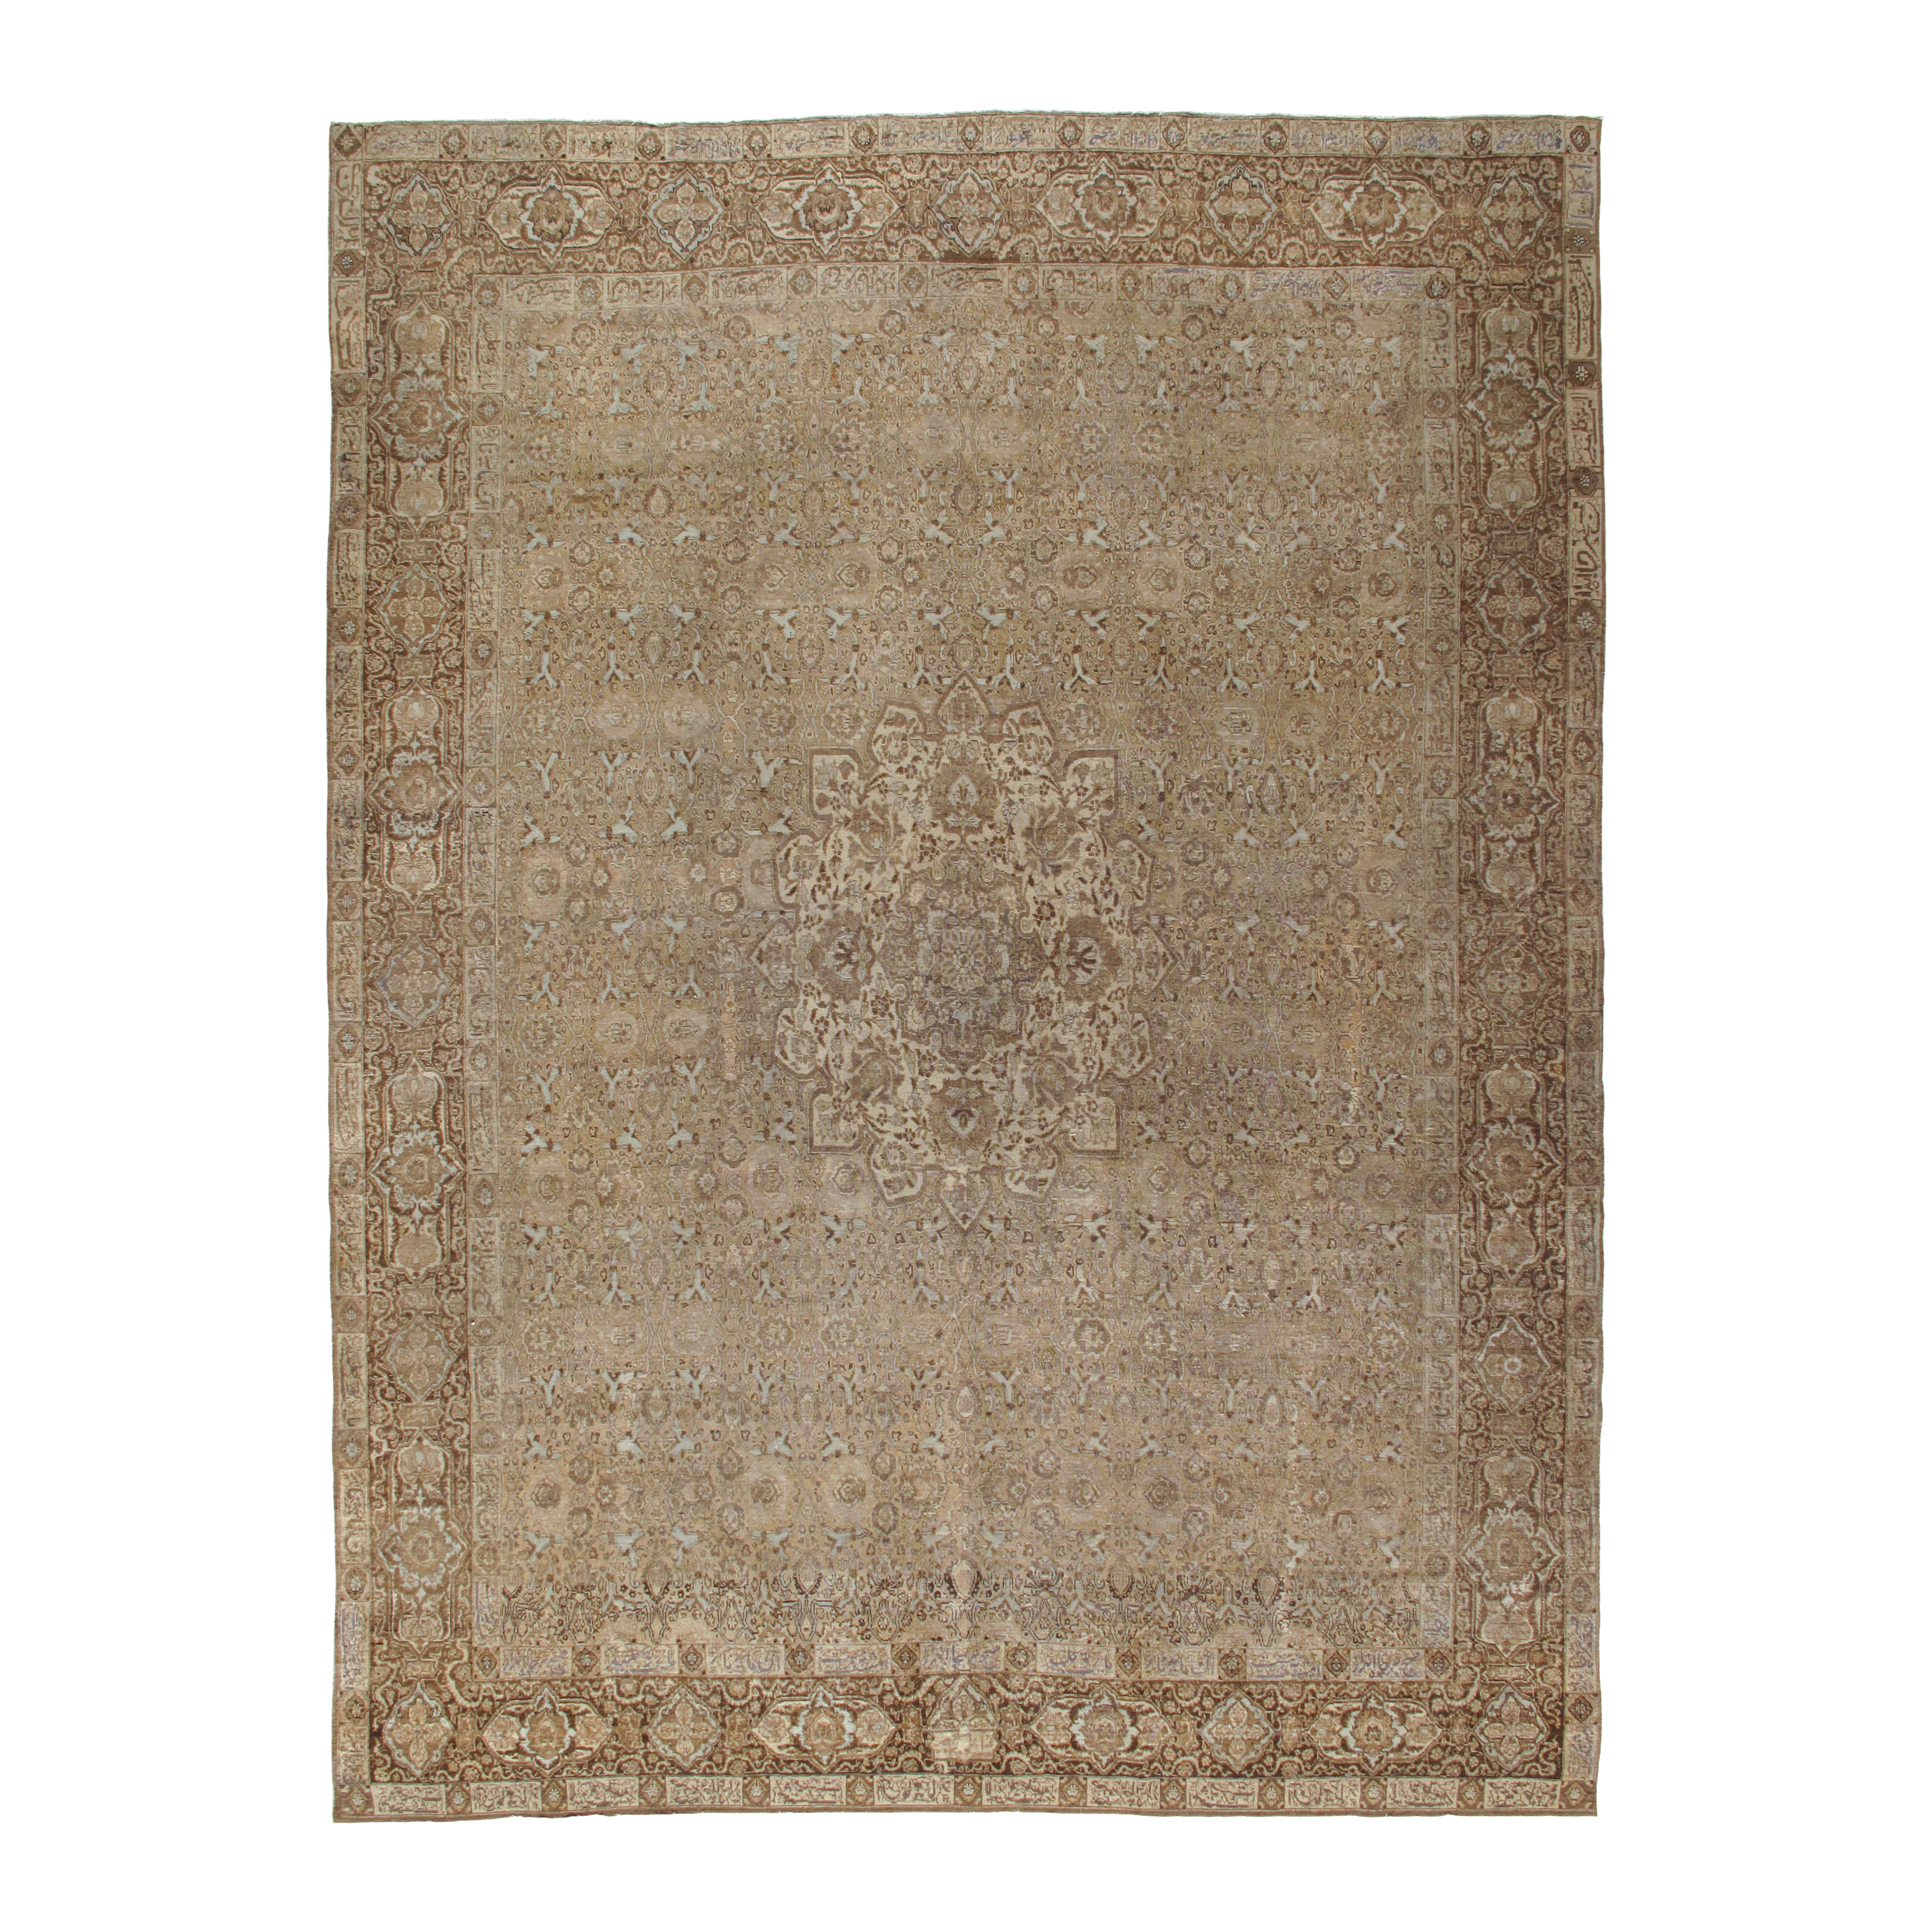 The Antique Tabriz Rug is hand-knotted and made of wool.